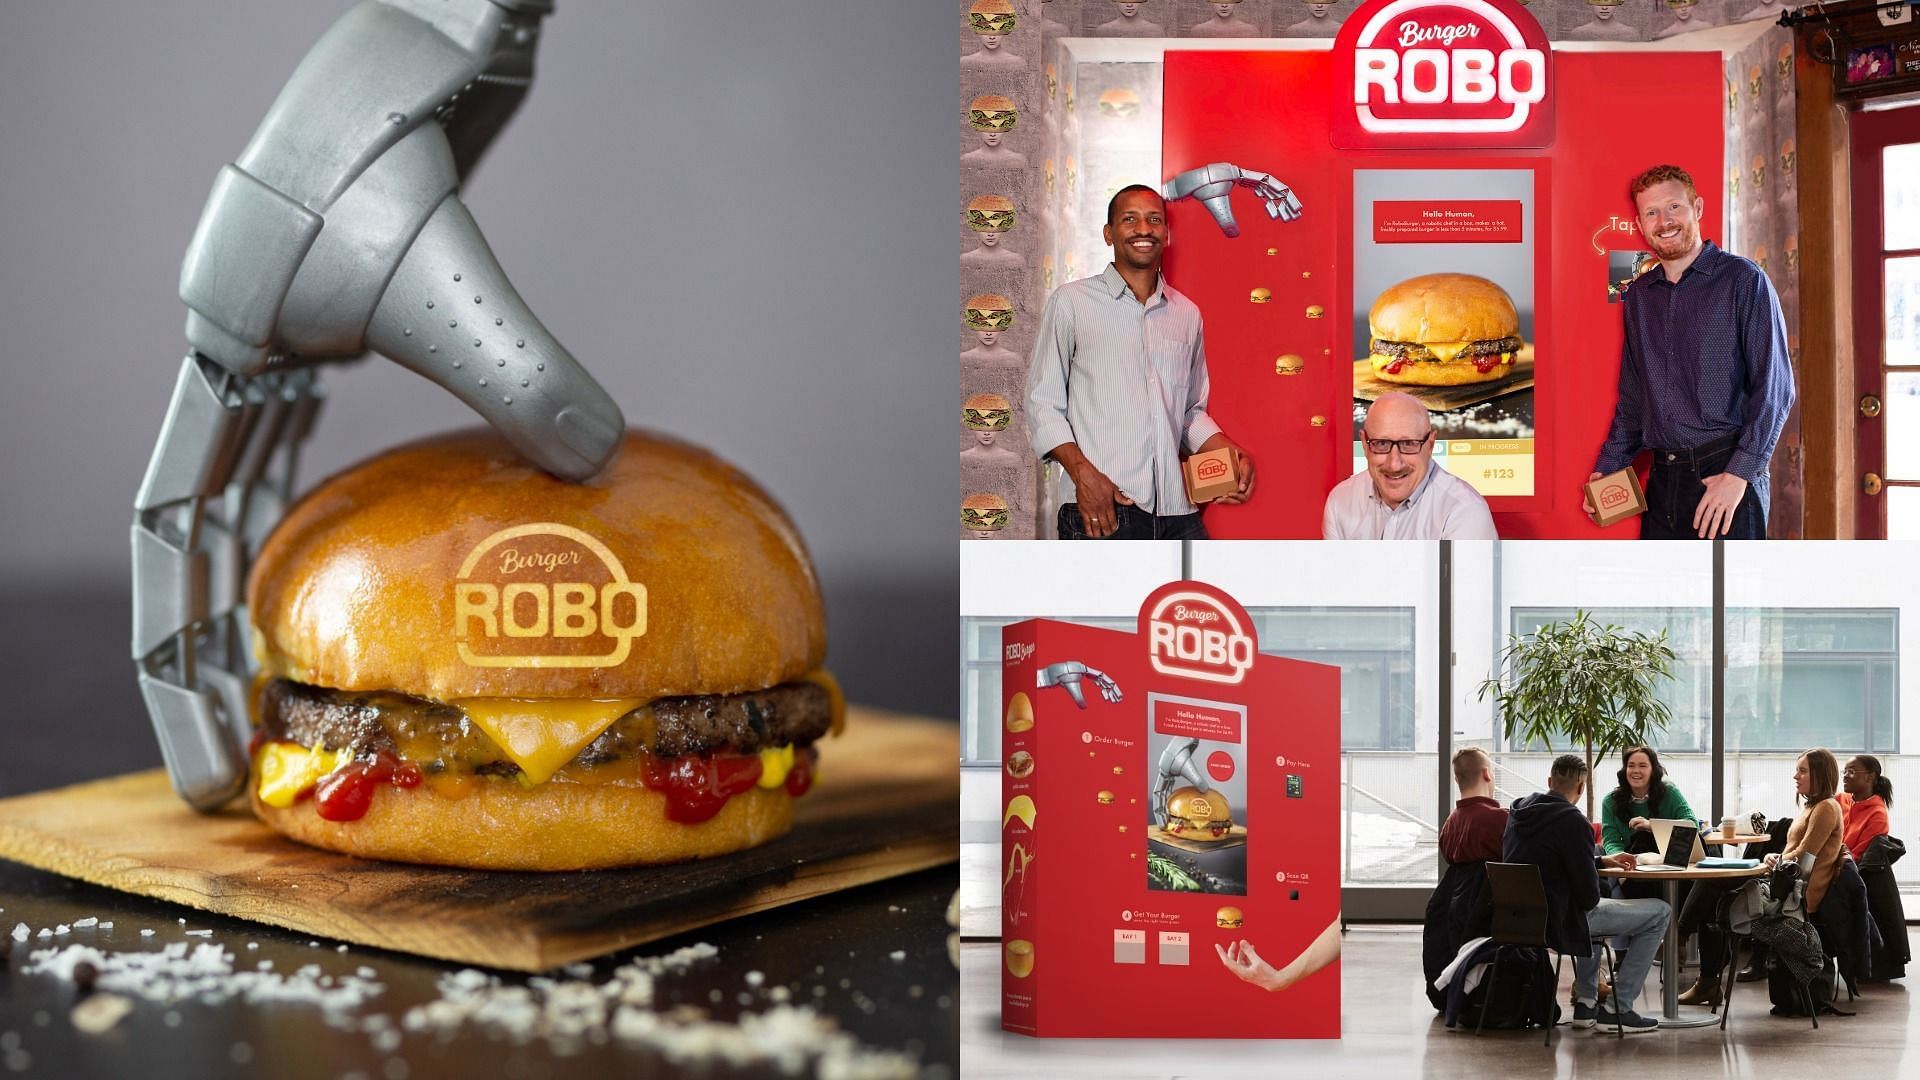 The robot-chef vending machine was co-founded by Audley Wilson in 2019, after 17 years of development (Images via RoboBurger)